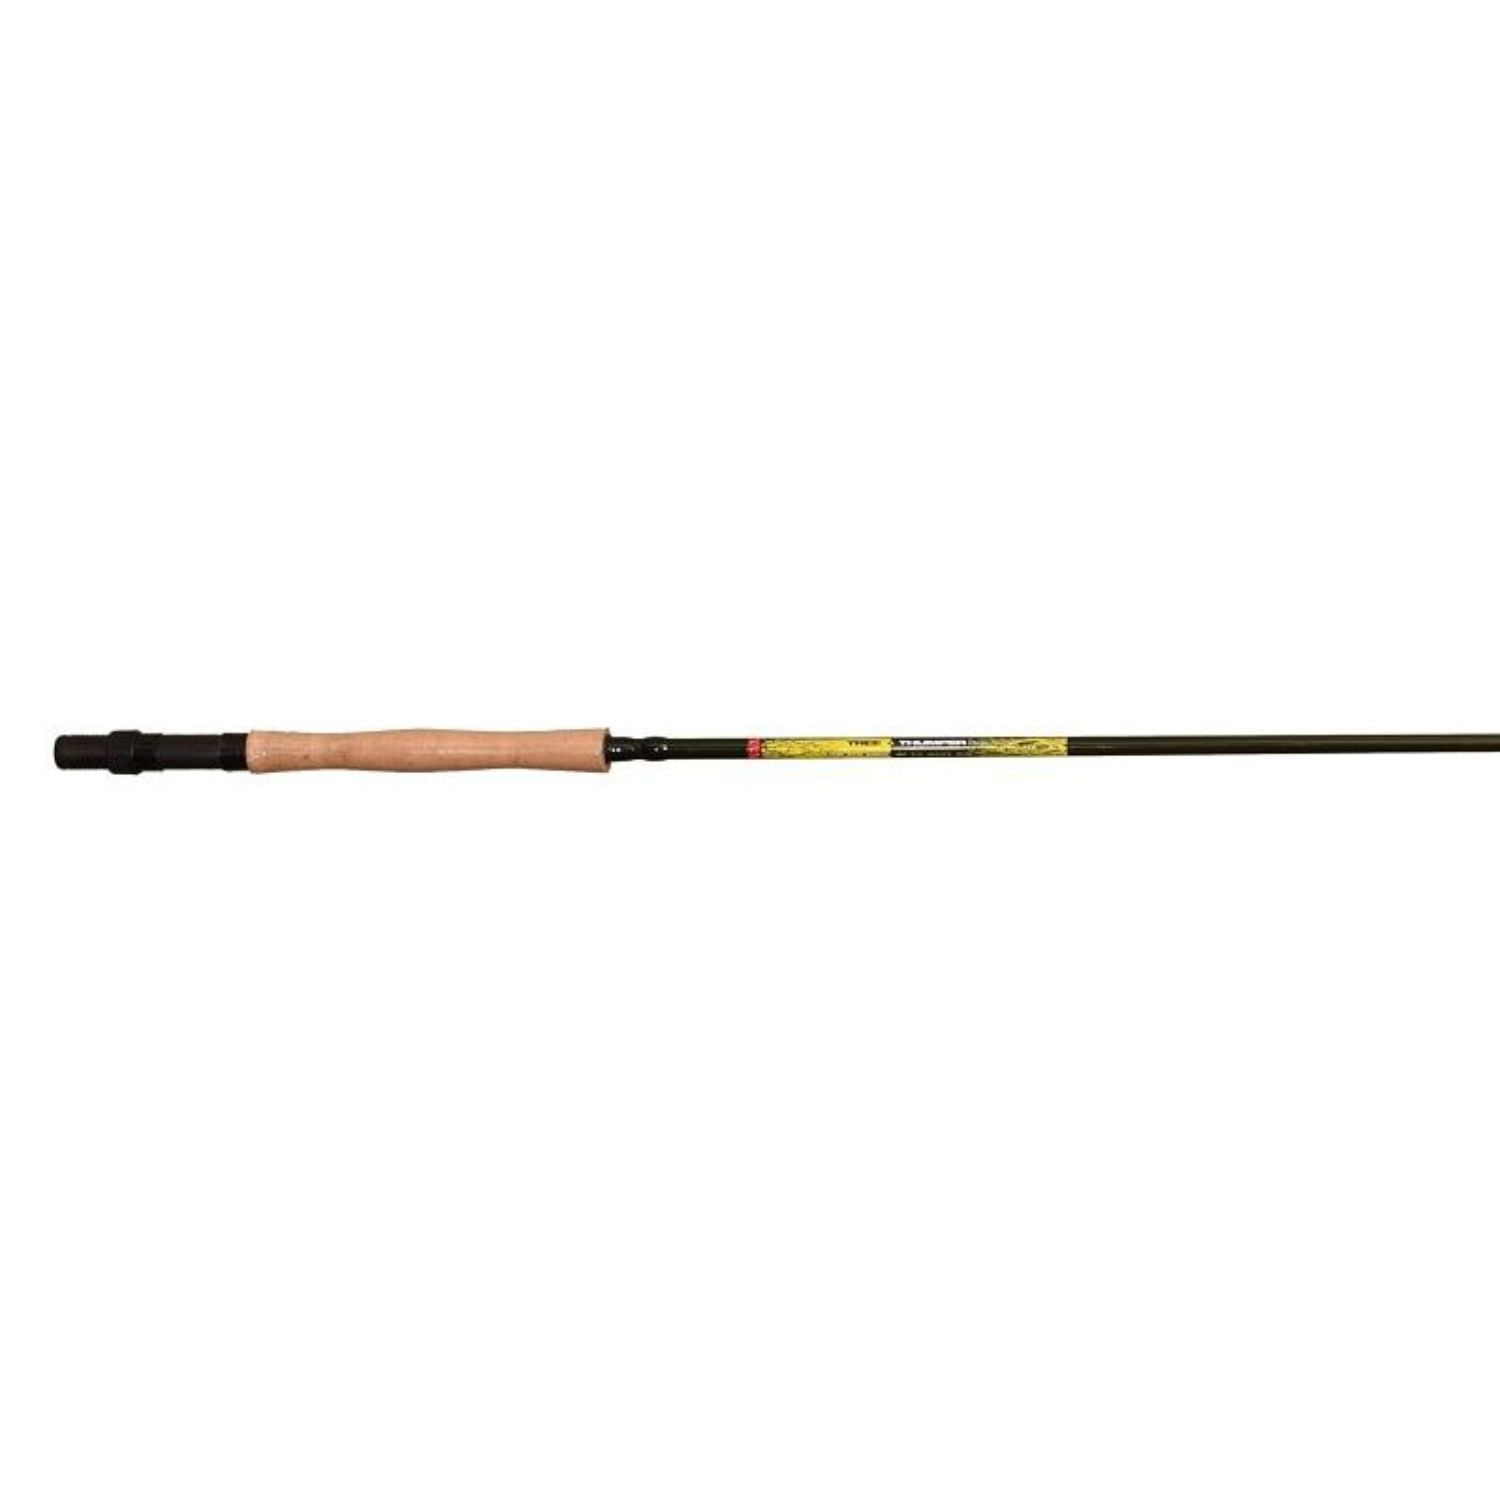 Ascension Rods Crappie Series Brush Thumper 10' 2 pc Fishing Rod  CLOSING SALE 